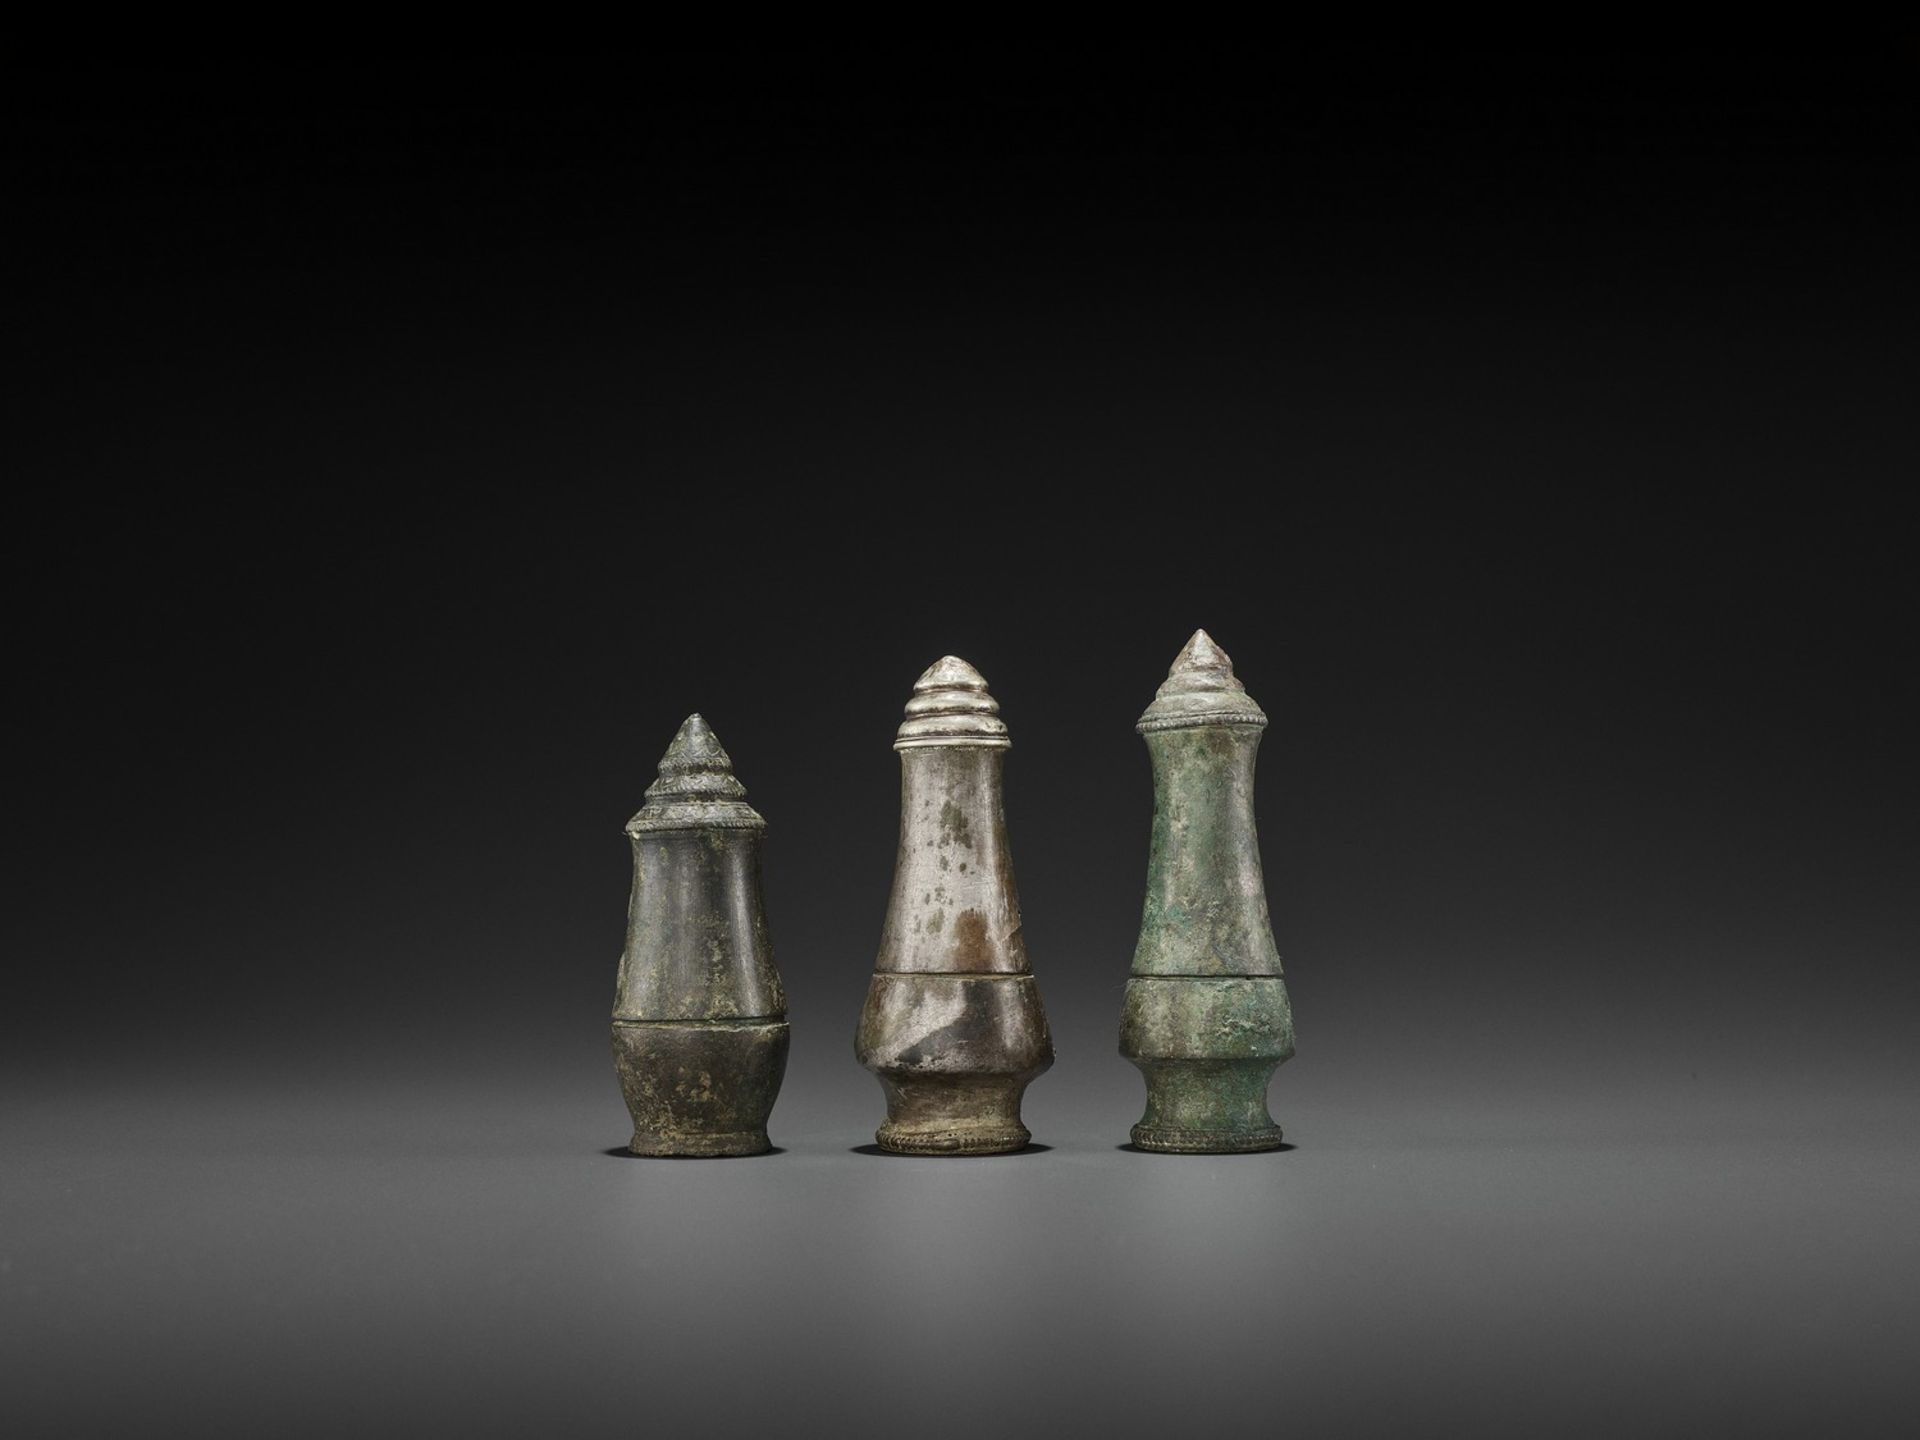 THREE CHAM SILVER BETEL NUT CONTAINERS